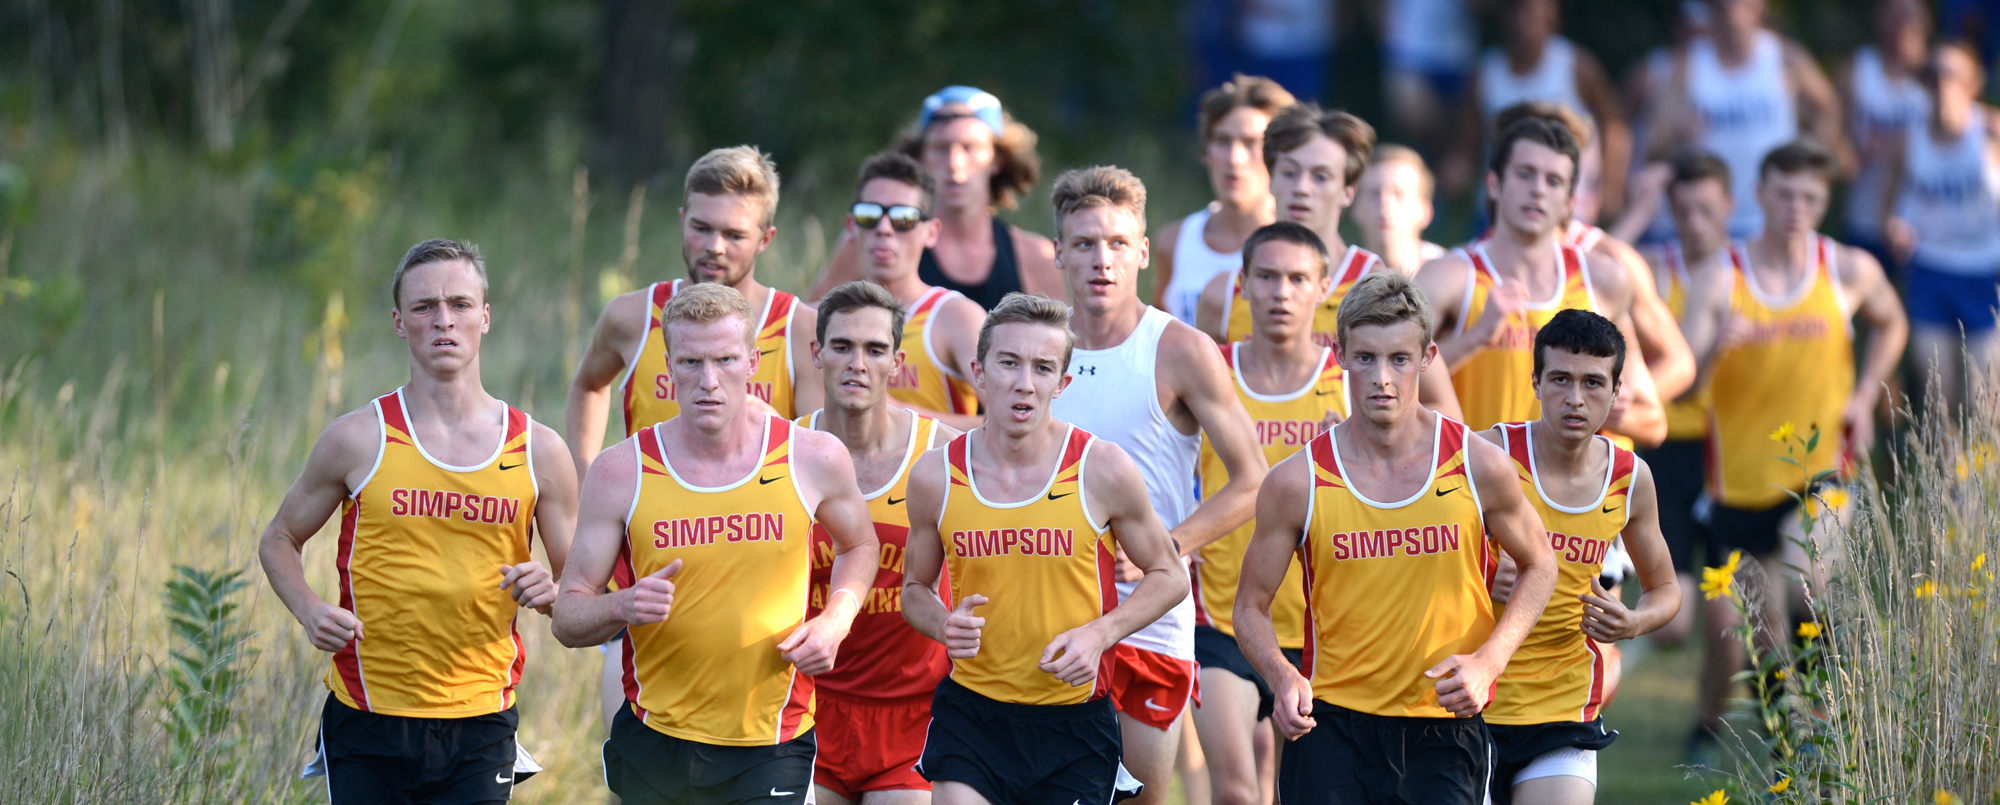 Men’s cross country team, Thompson collect national academic honors